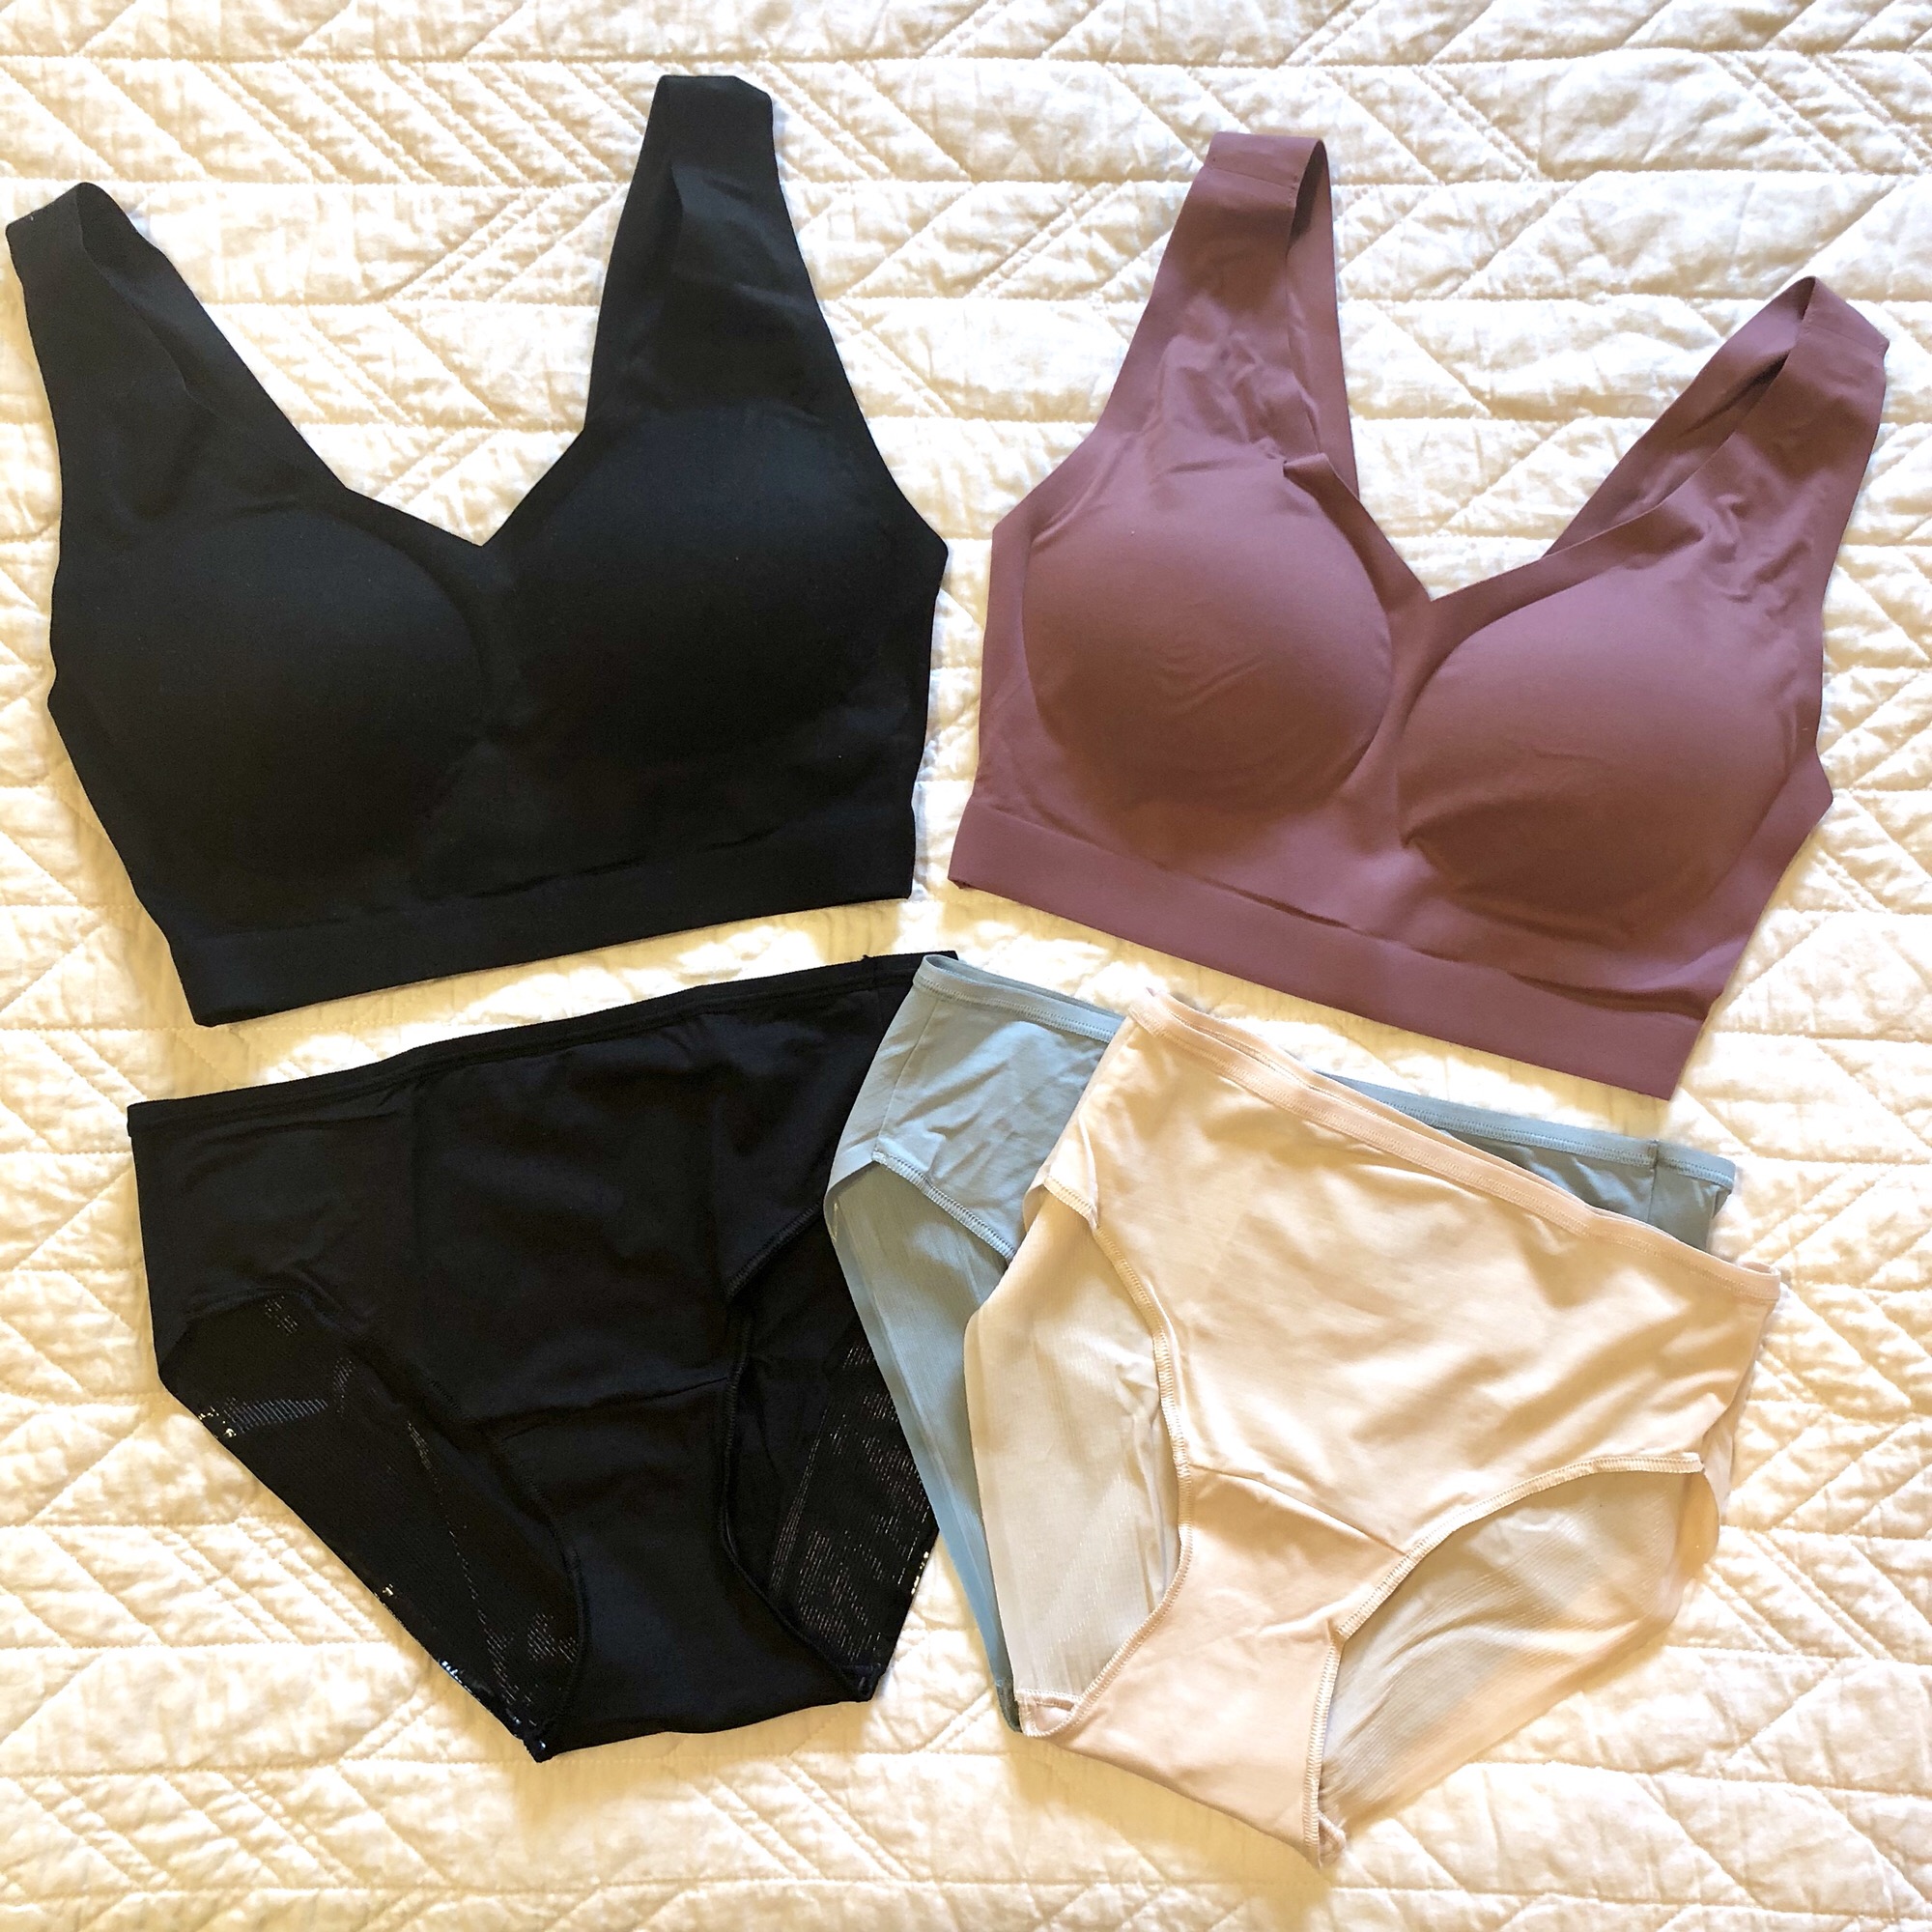 The Enbliss Bra from Somaand some AMAZING undies and pajamas